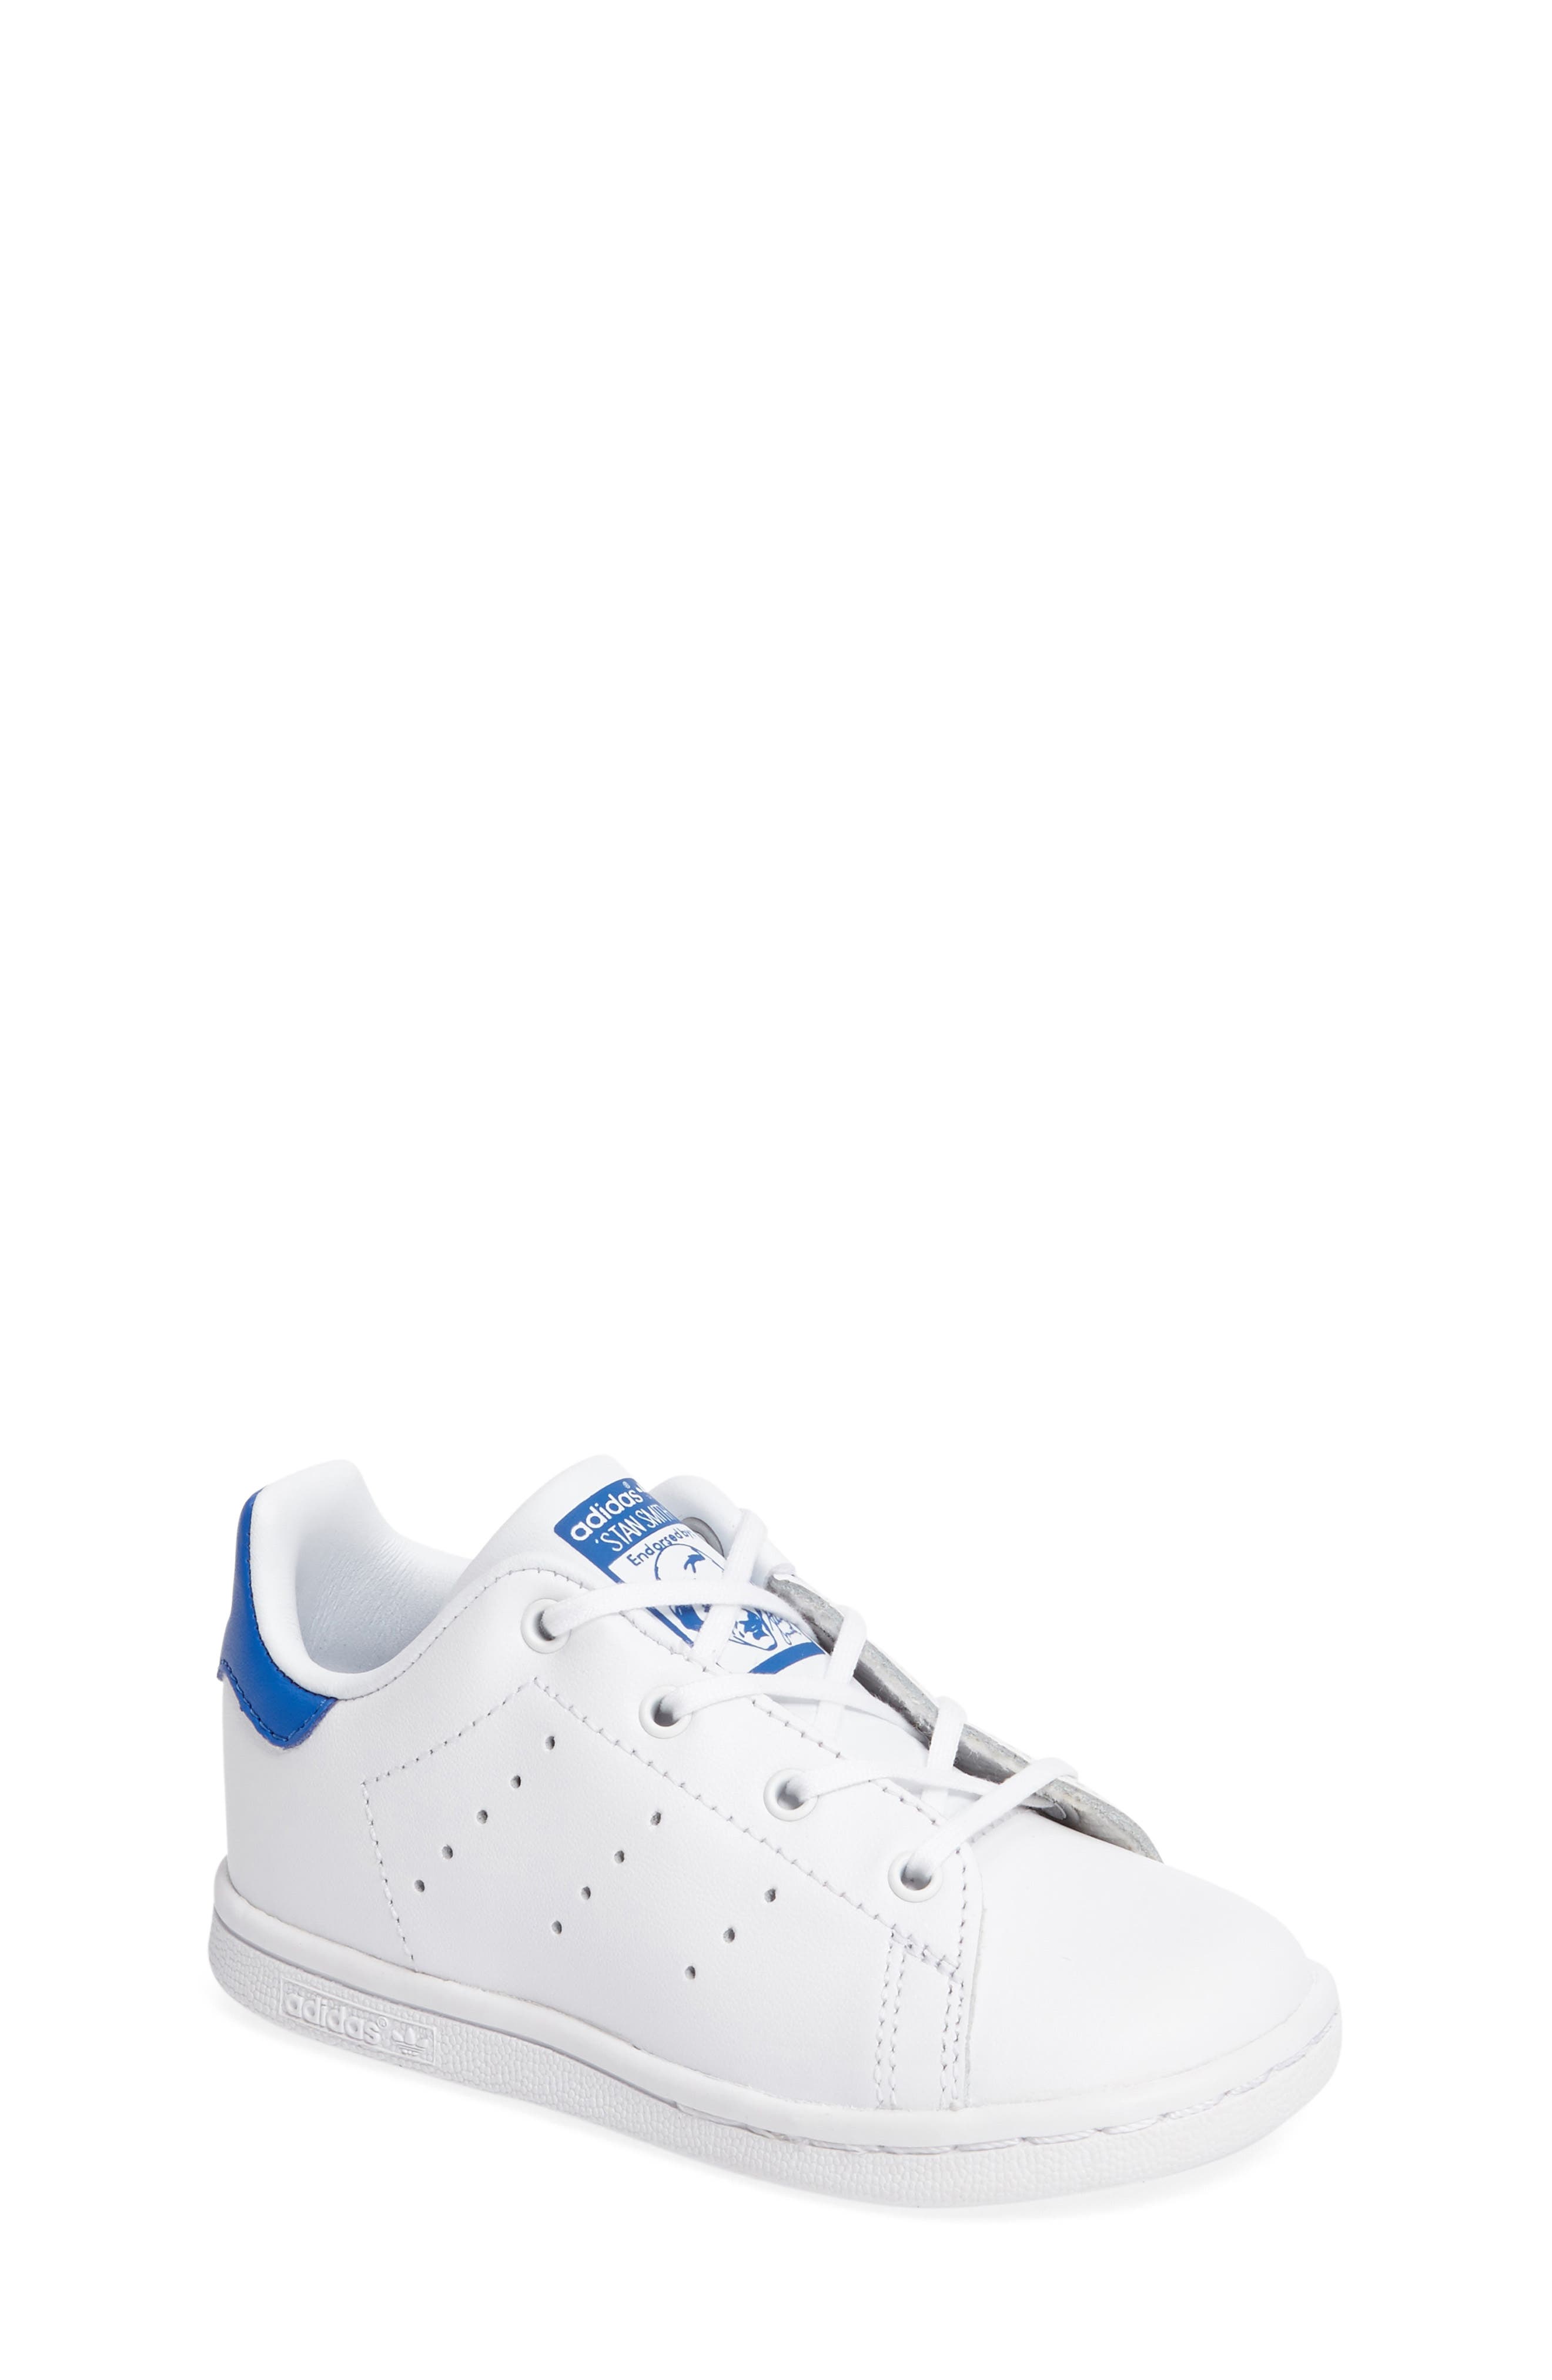 stan smith sneakers nordstrom